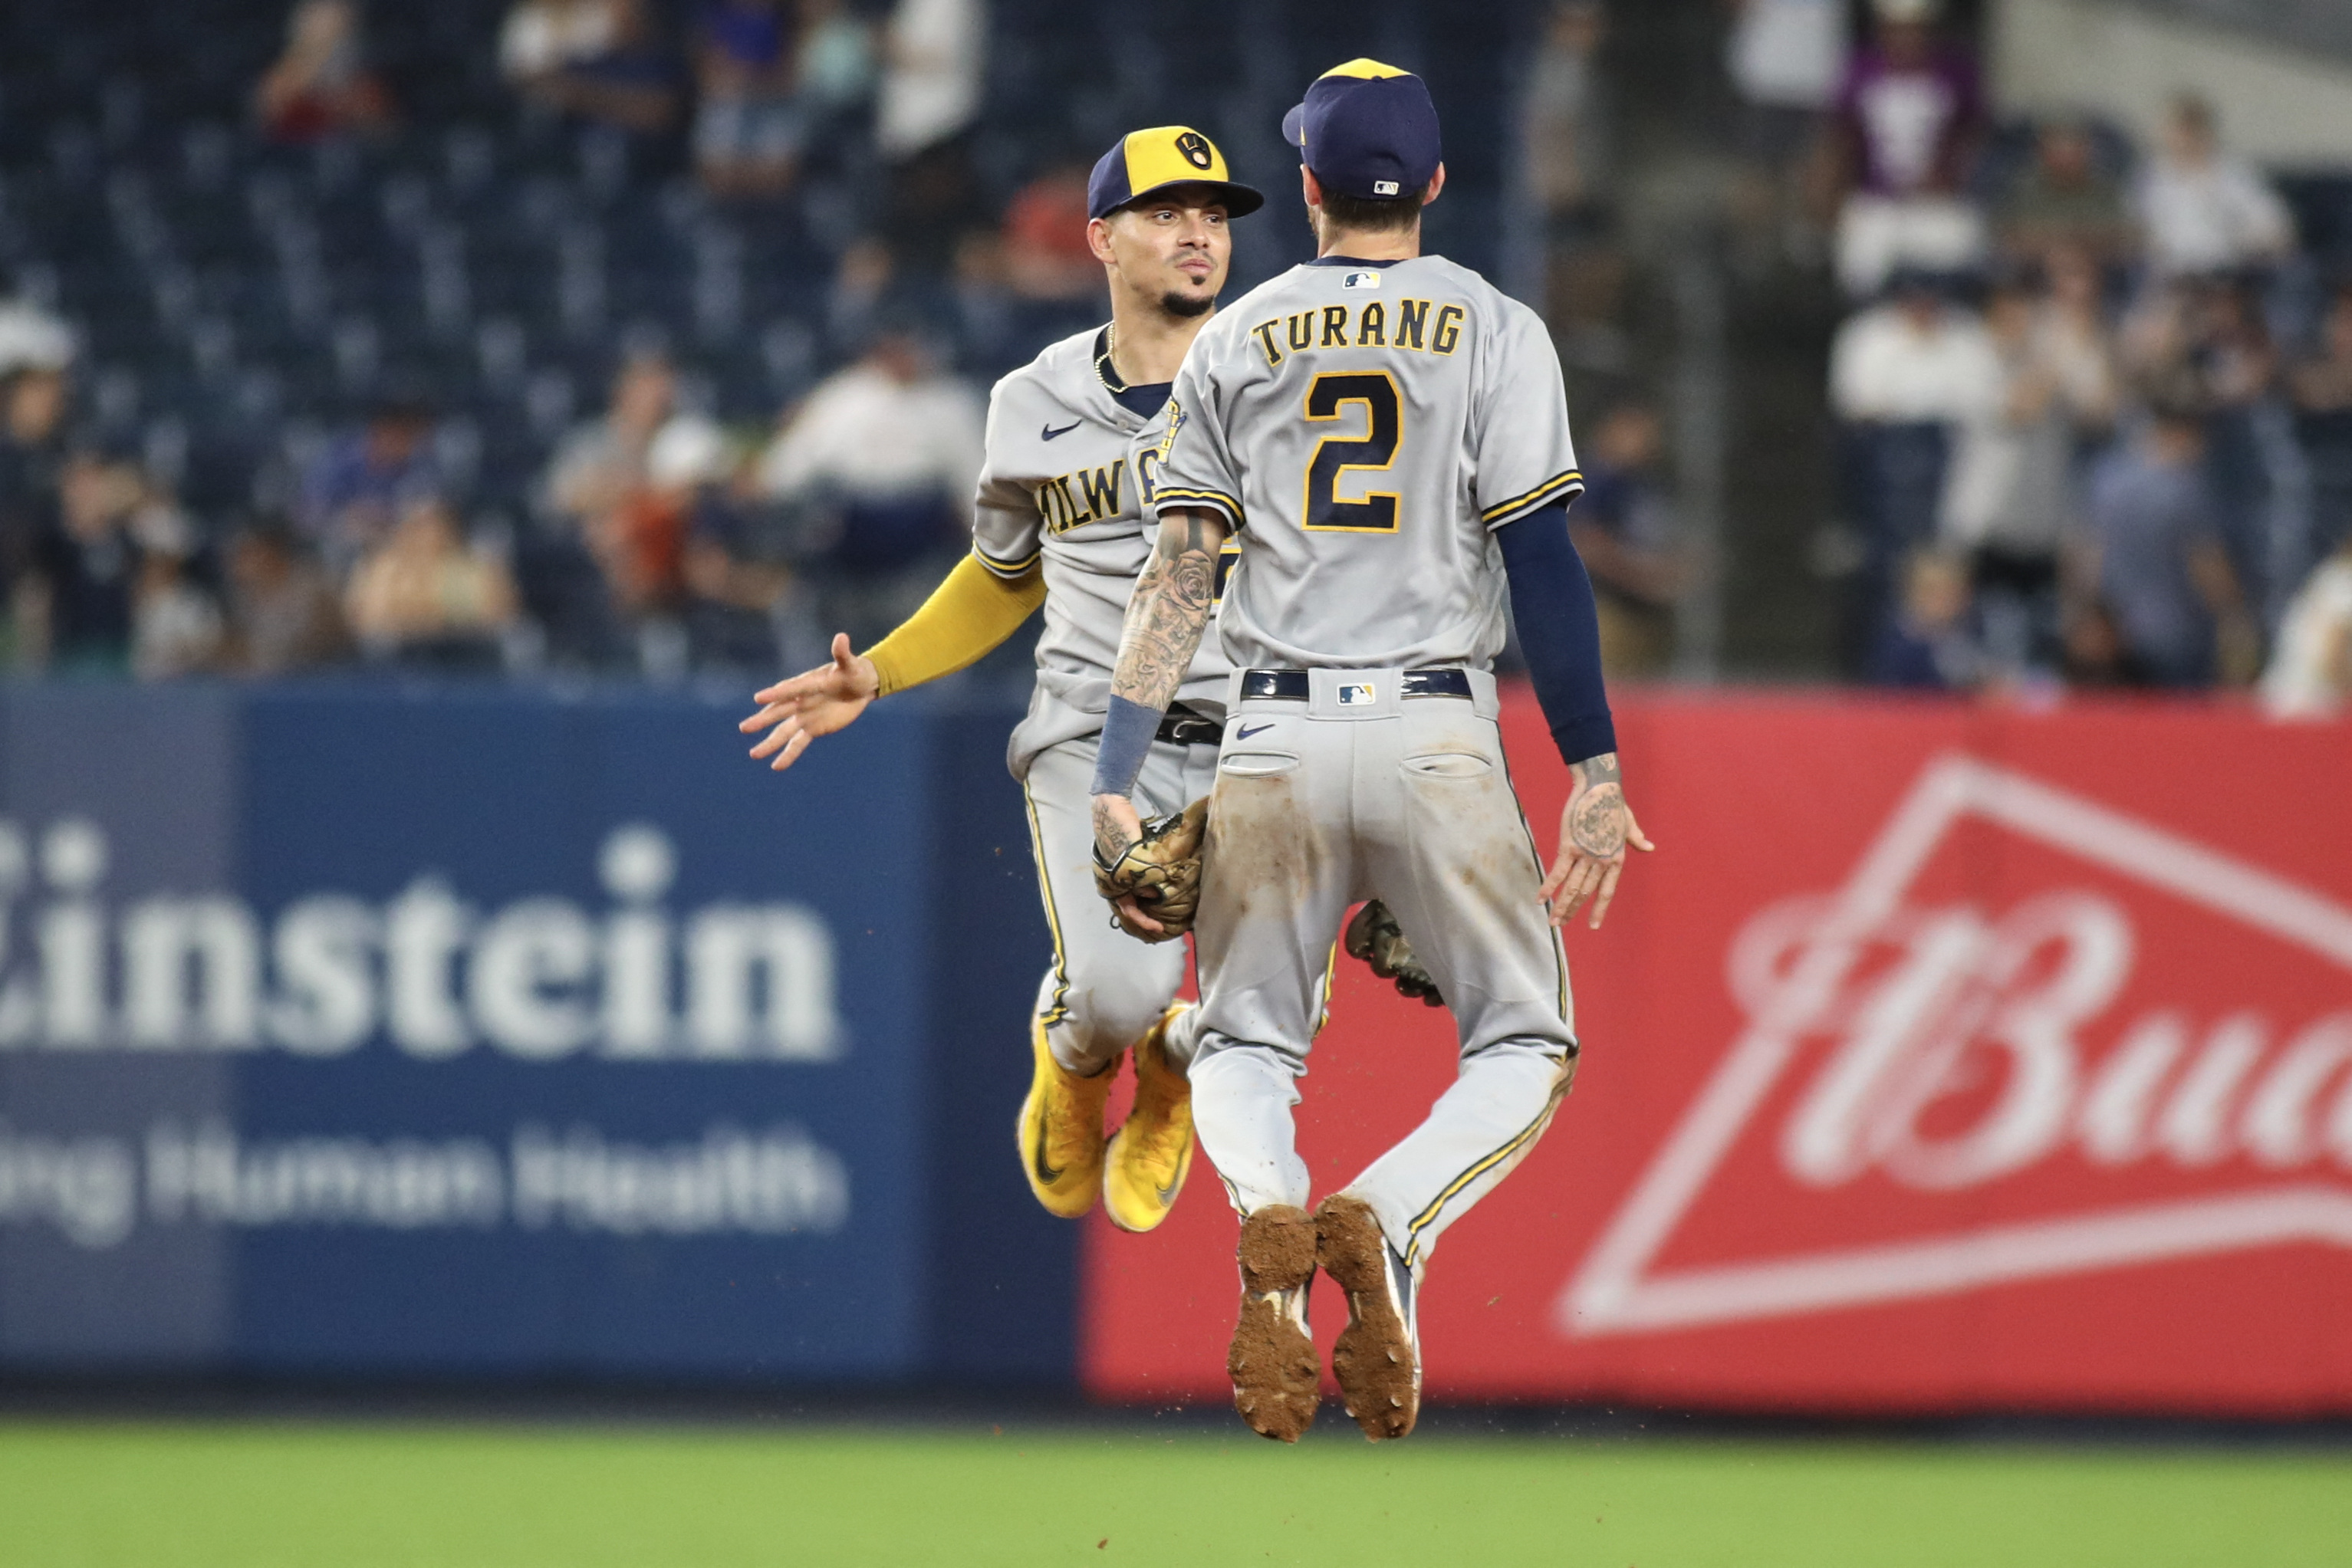 FLY THE L! Milwaukee Brewers are NL Central Champs